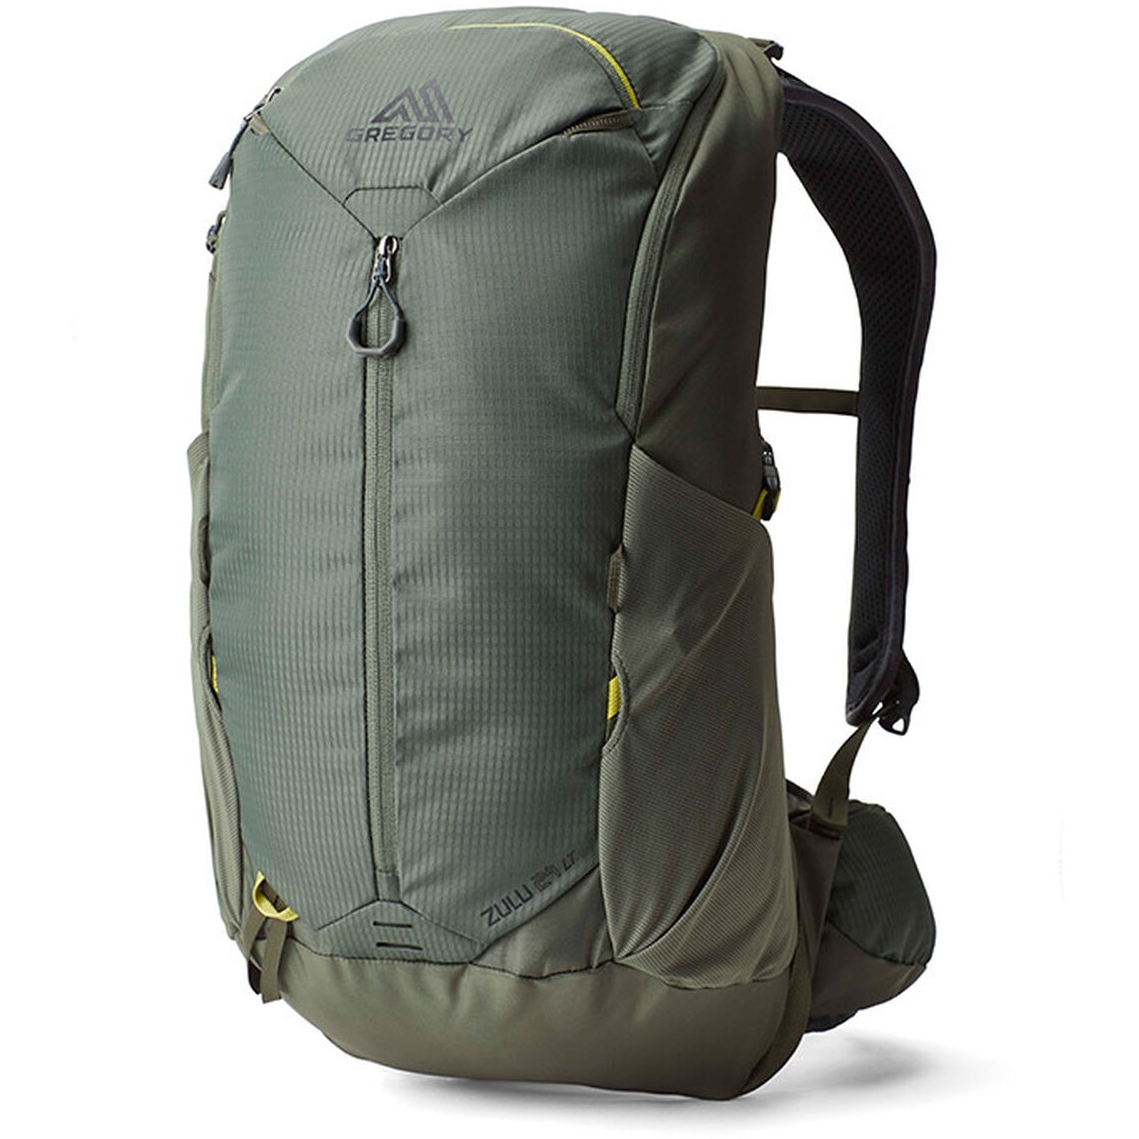 Picture of Gregory Zulu 24 LT Backpack - Forage Green